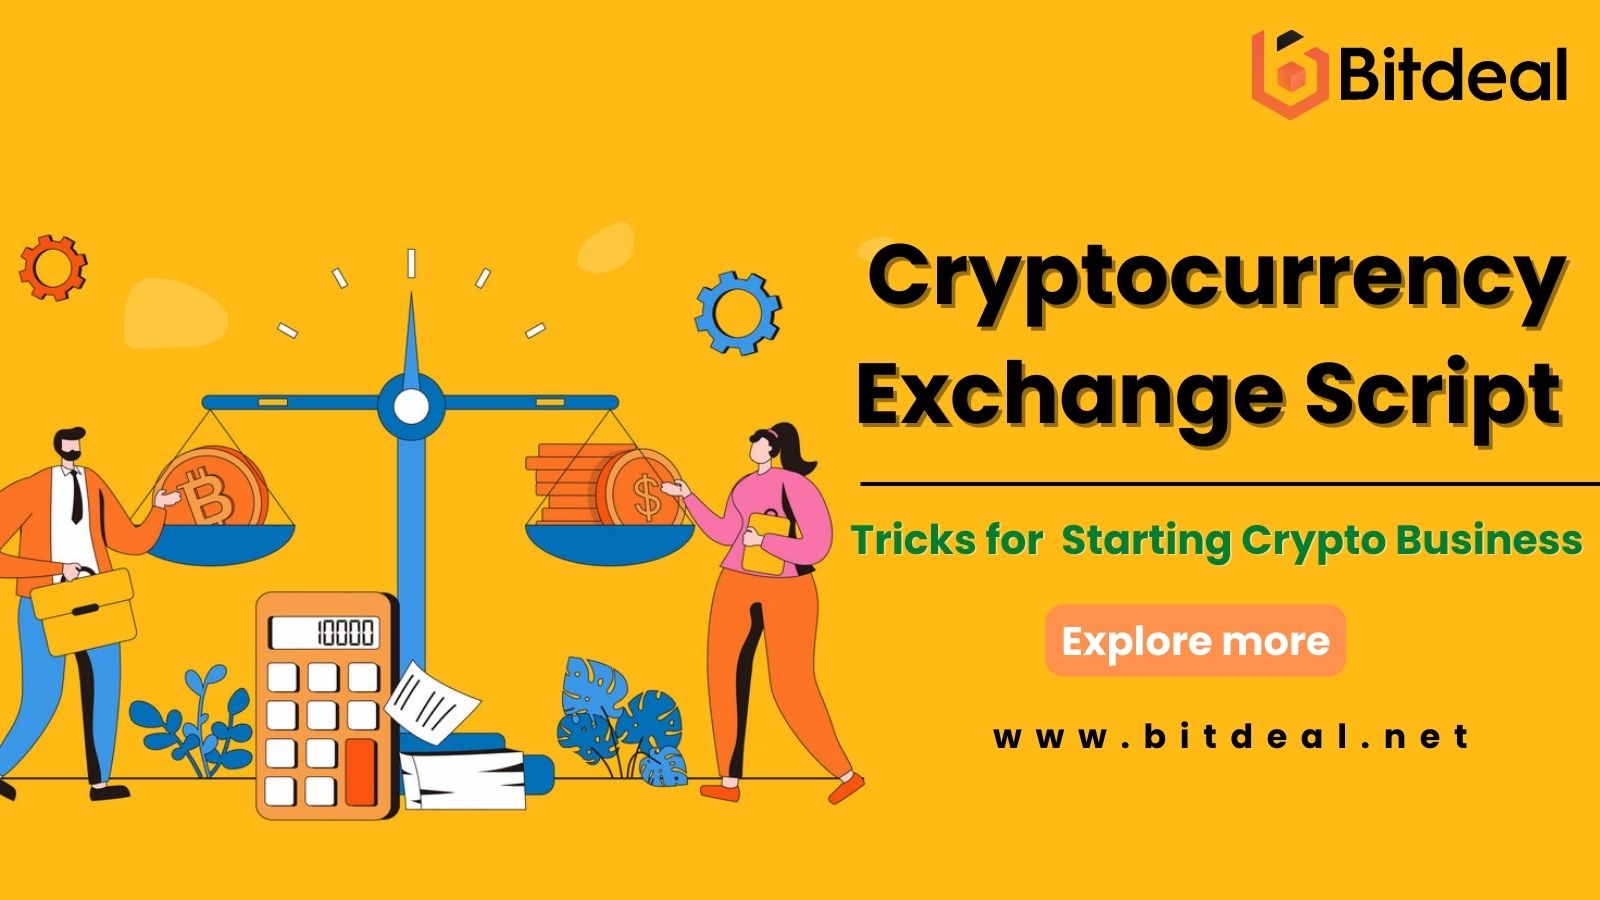 What Are The Tricks For Starting A Cryptocurrency Exchange Business?